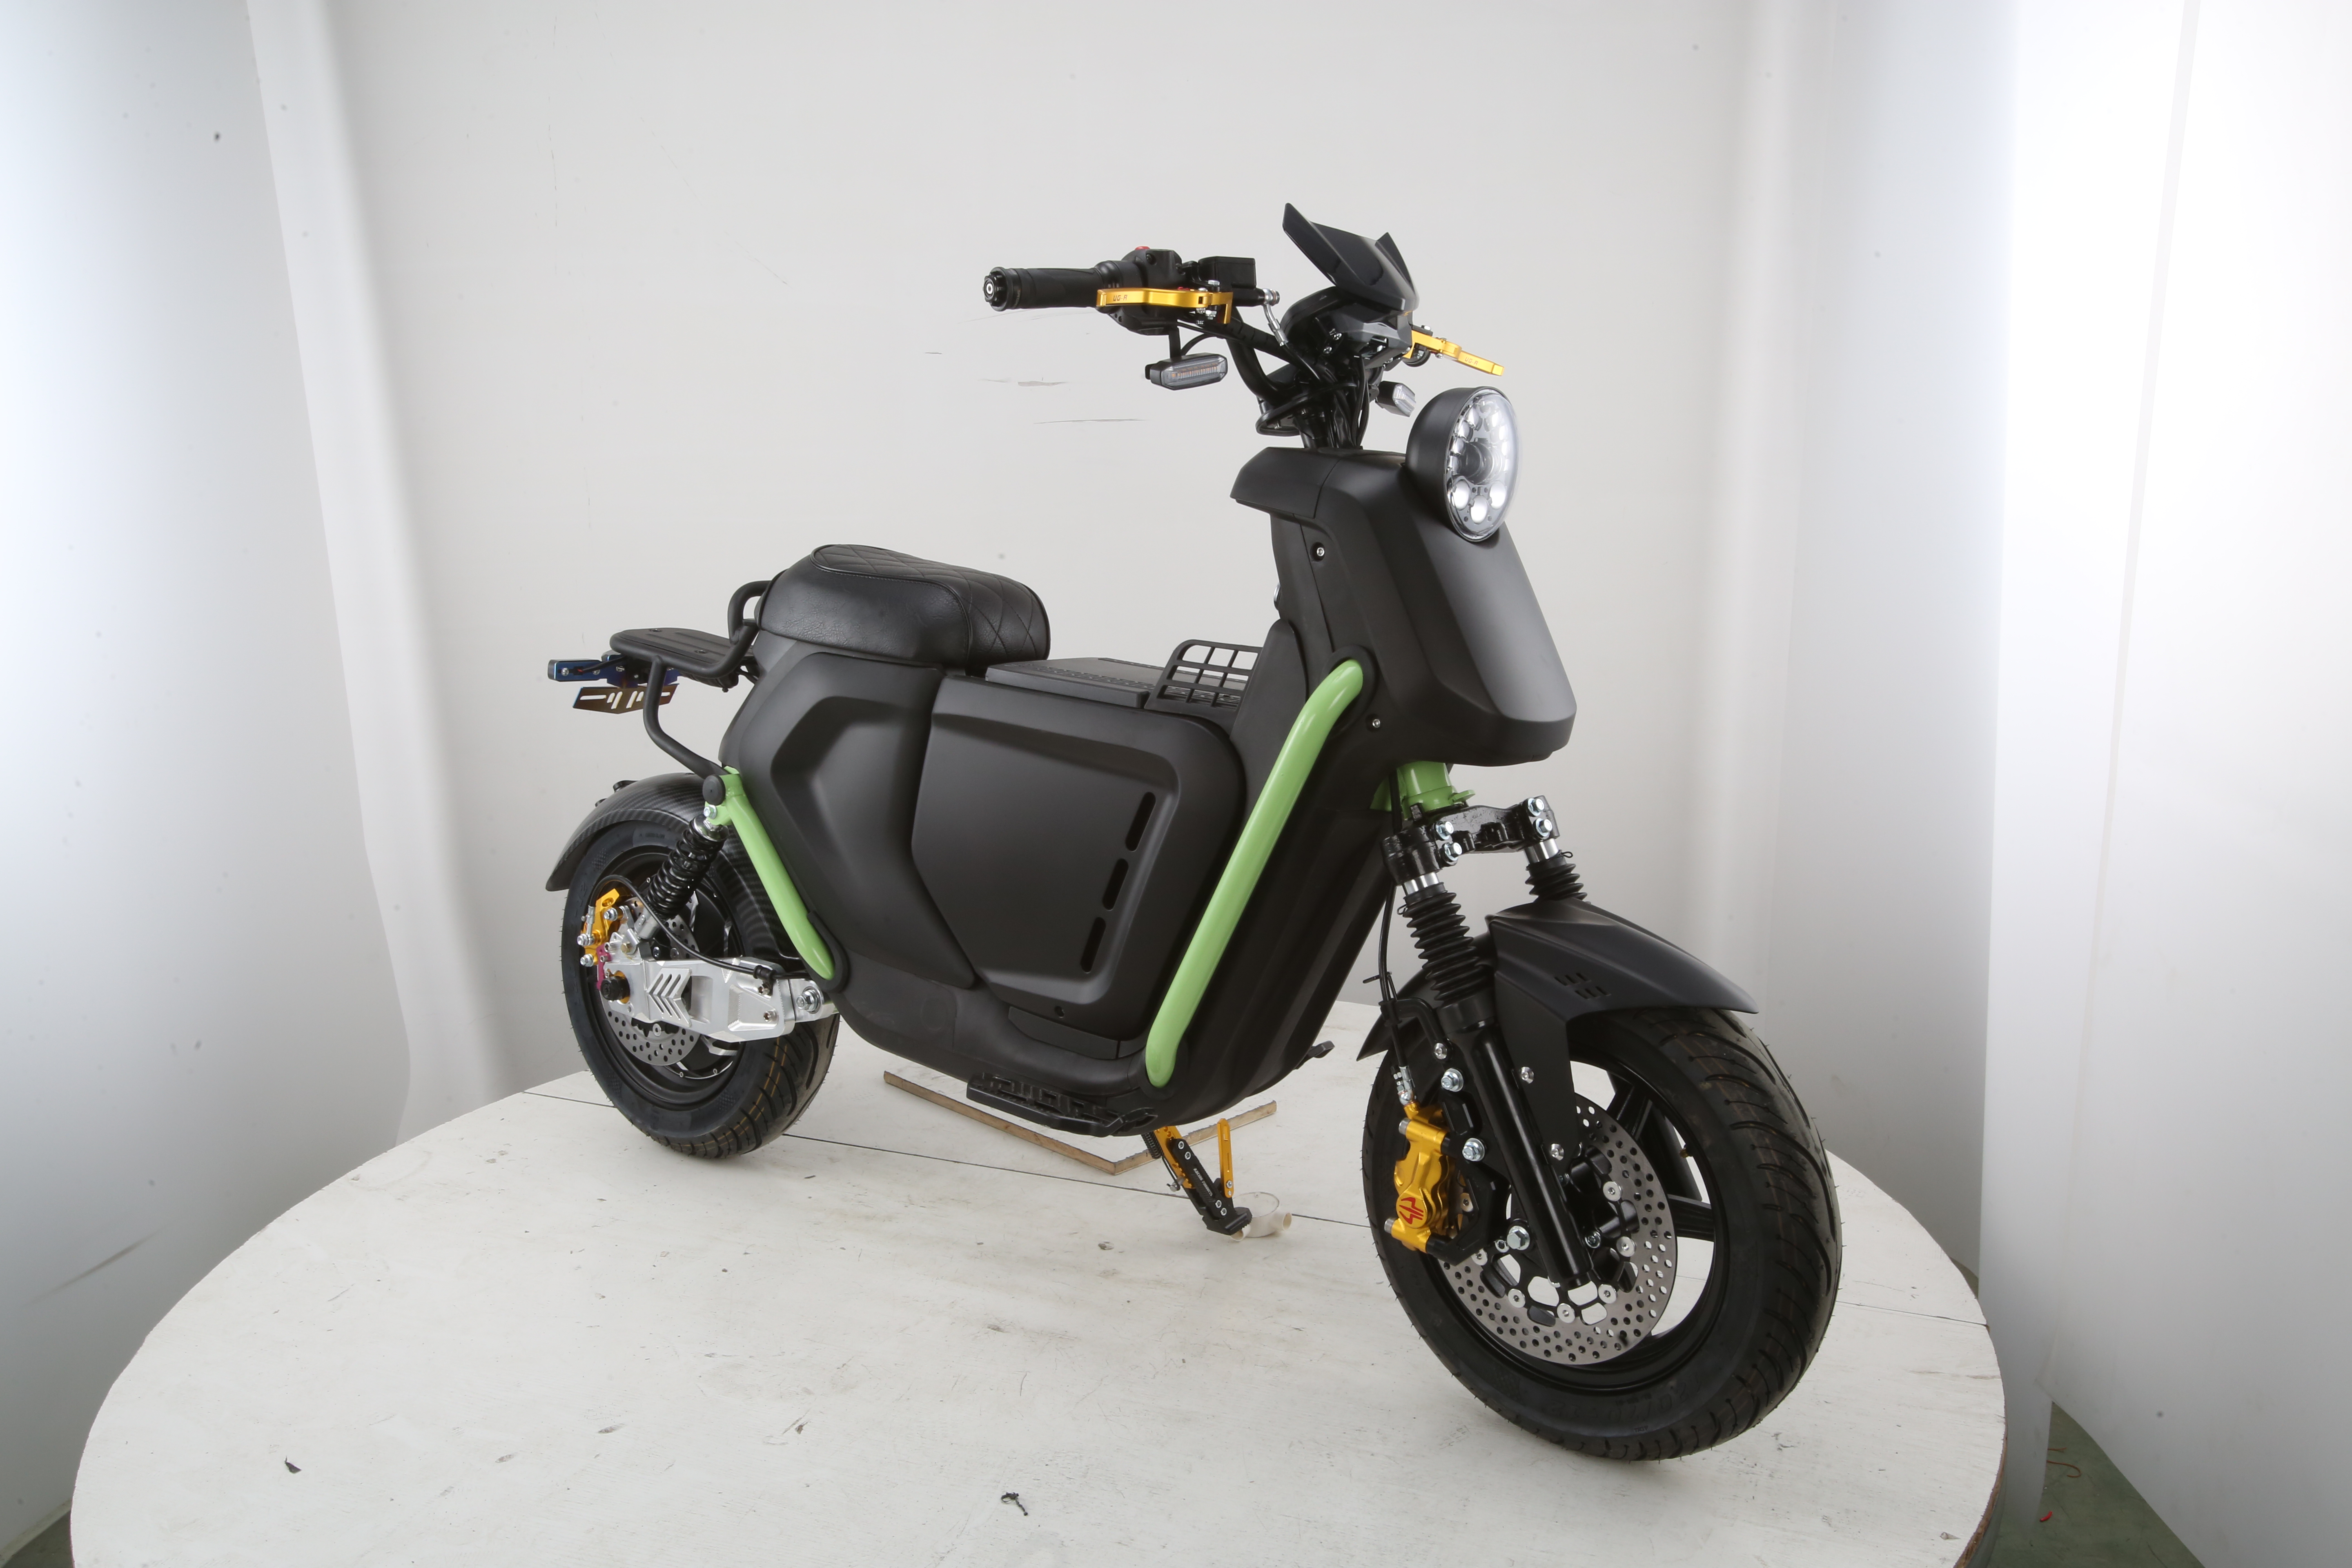 Factory EXILIM Custom electrica scooter EEC 2000w electrico motorcycle pro adulto